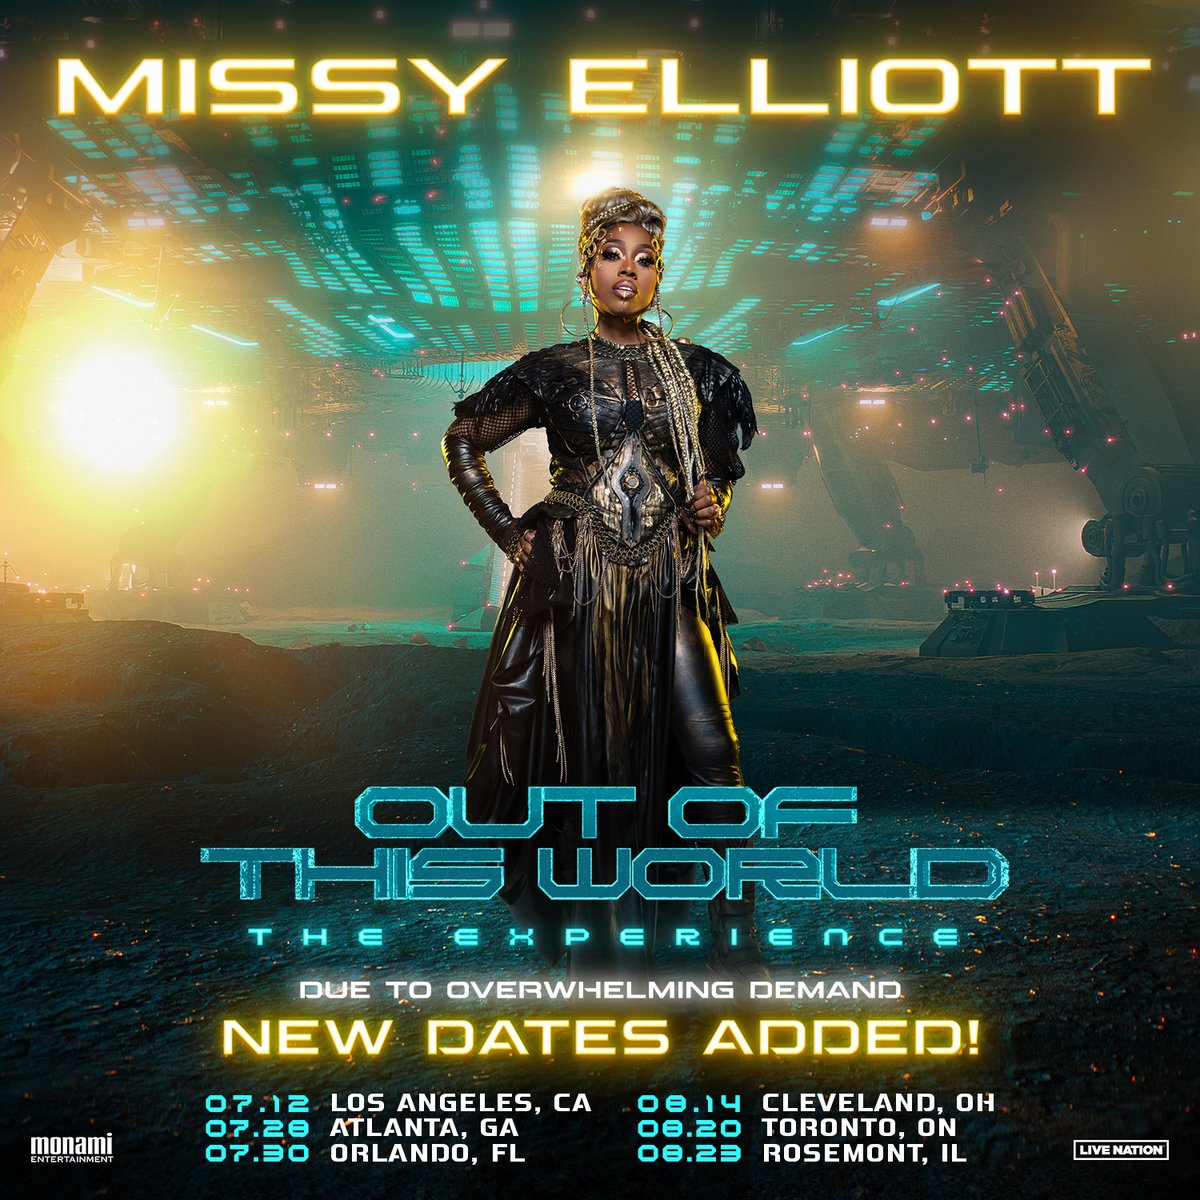 Due to overwhelming demand, 👽🌍🪐 @MissyElliott is adding more dates to her OUT OF THIS WORLD - The Missy Elliott Experience tour with @ciara, @BustaRhymes and @Timbaland! Tickets for new dates on sale Friday, May 3rd at 10AM local: livemu.sc/4aI7yz3 🙌🏾